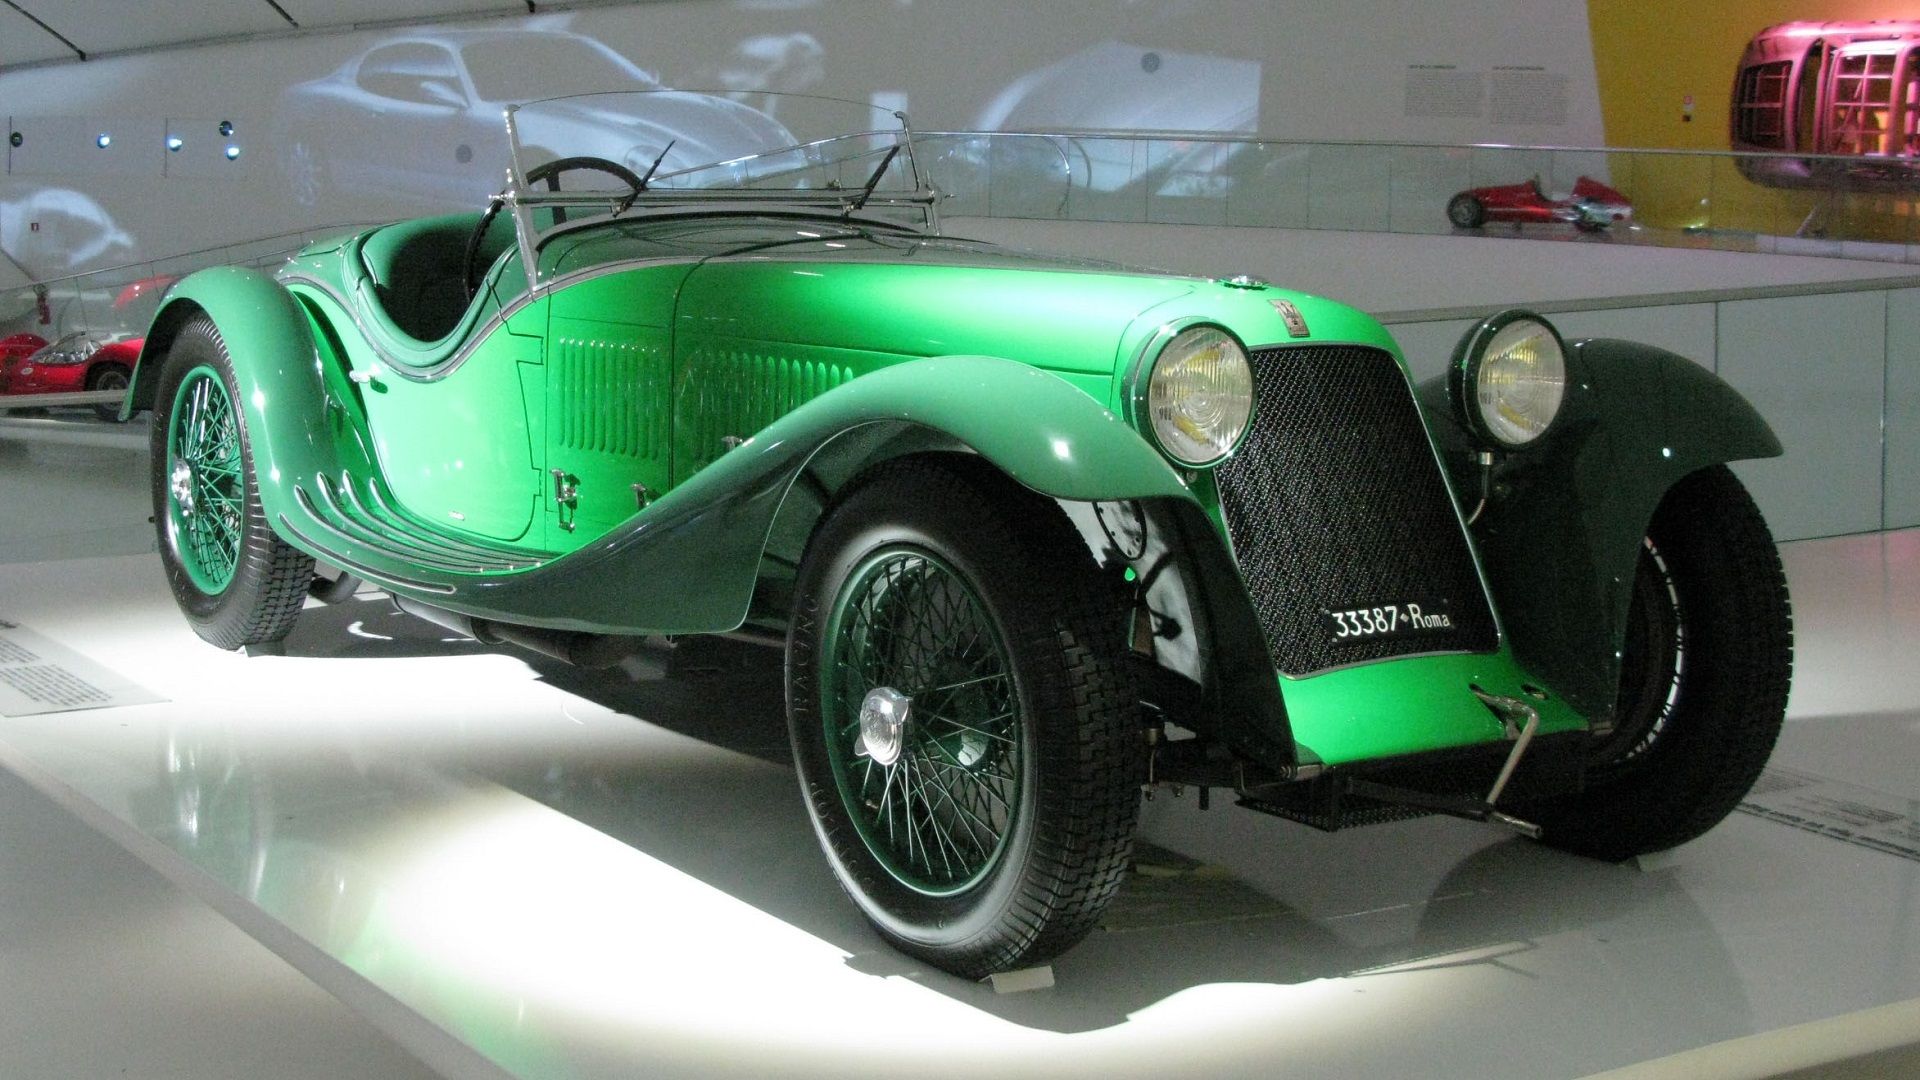 A parked 1932 Maserati Tipo V4 on display